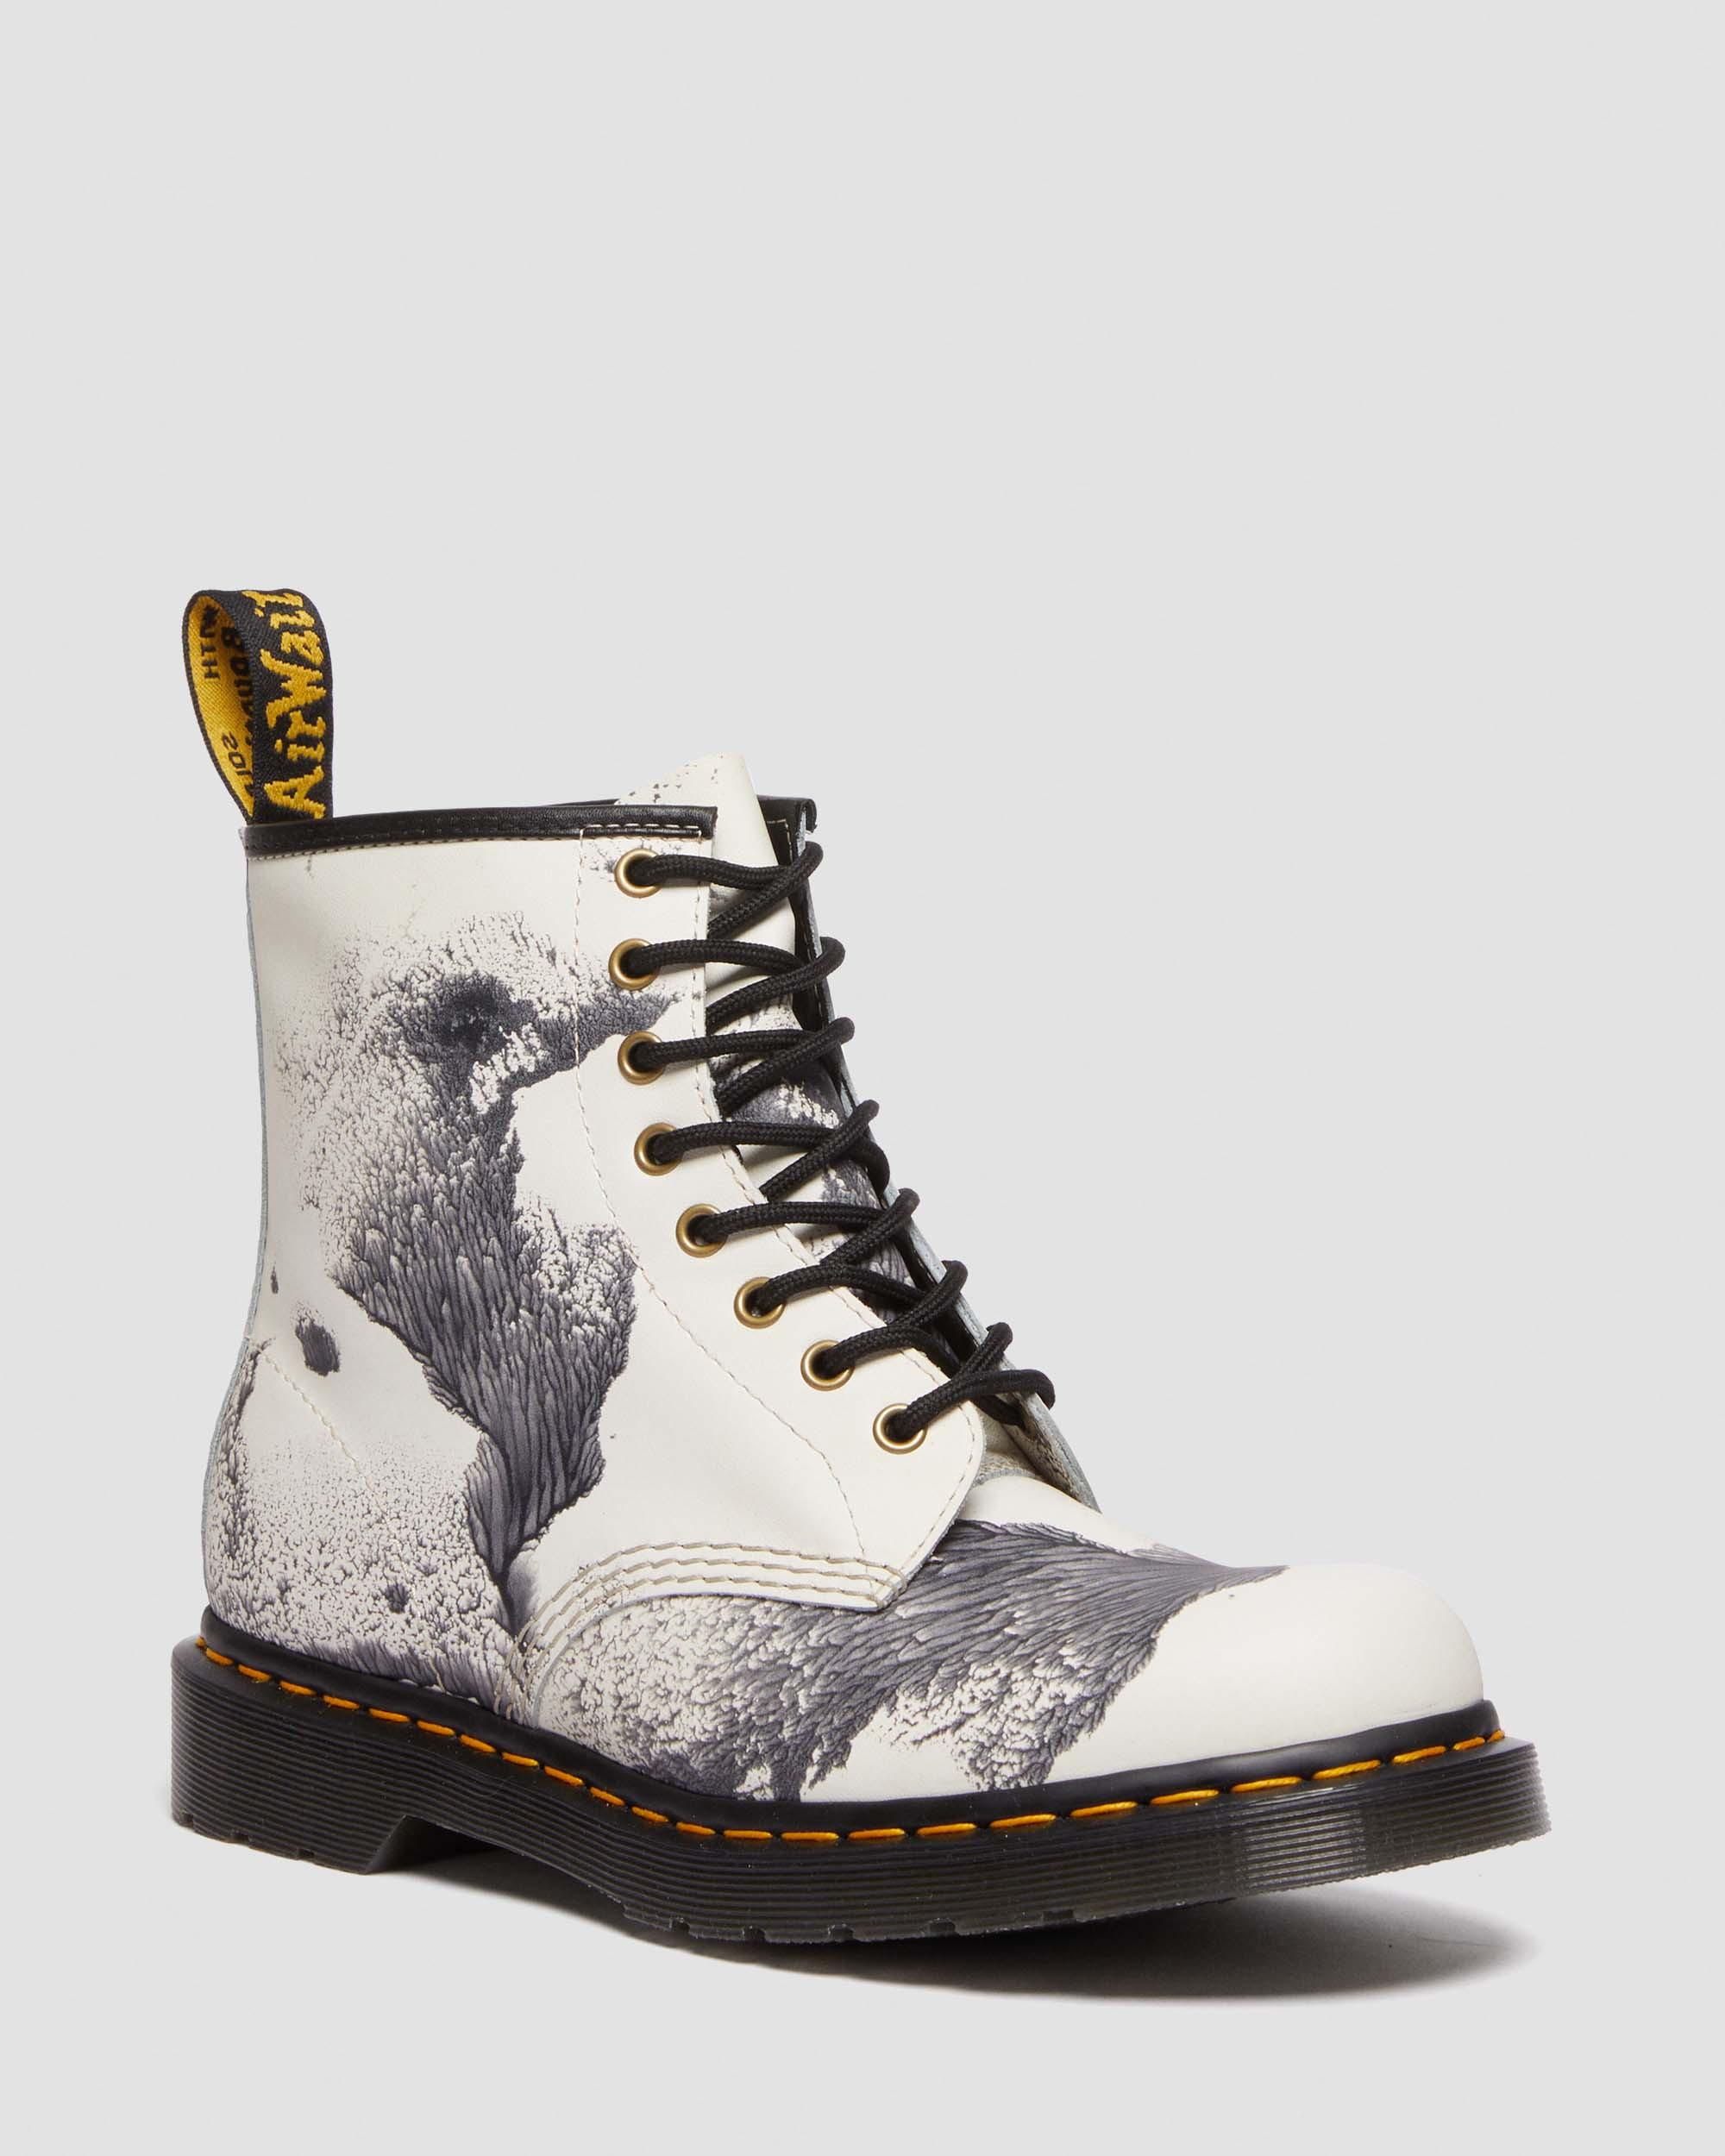 Dr. Martens' 1460 Tate Decal Boot In Decalcomania, Women's At Urban Outfitters In Black,multi,printed